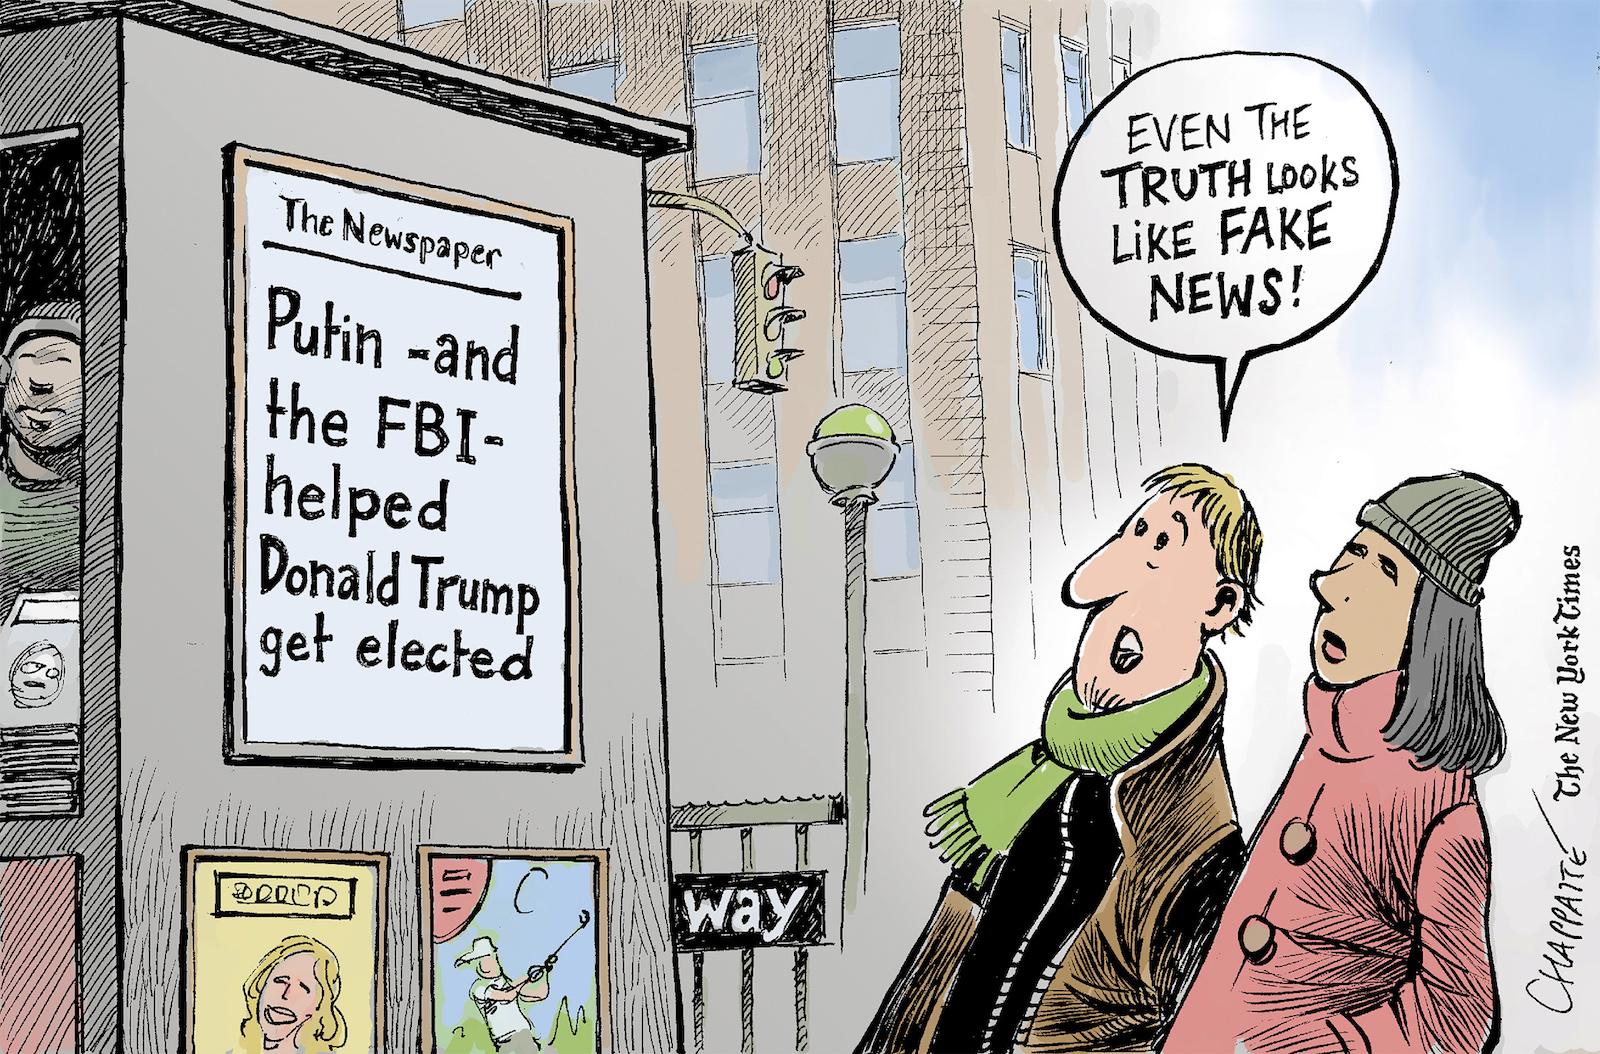 Russia meddled in US election